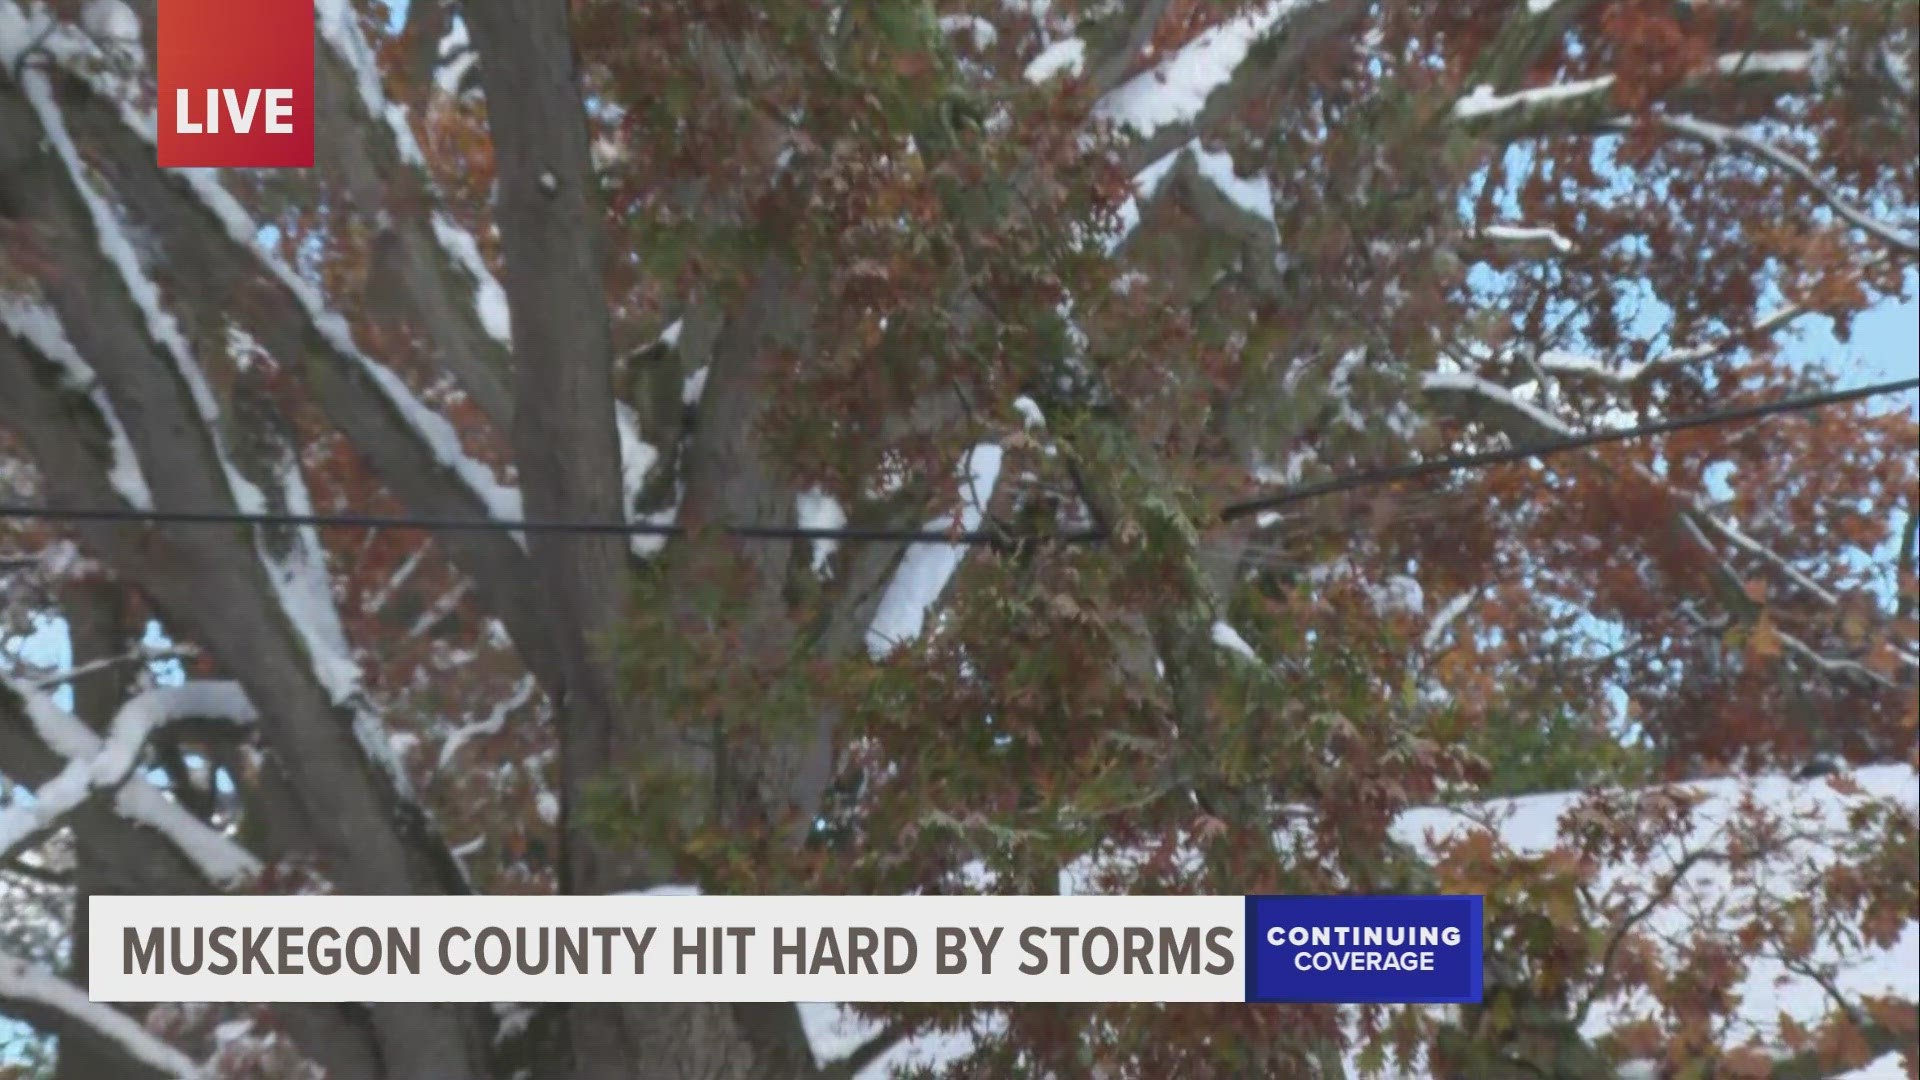 Around 43,000 homes and businesses in Muskegon County had power knocked out at some point on Halloween and the next day due to heavy snow and wind.